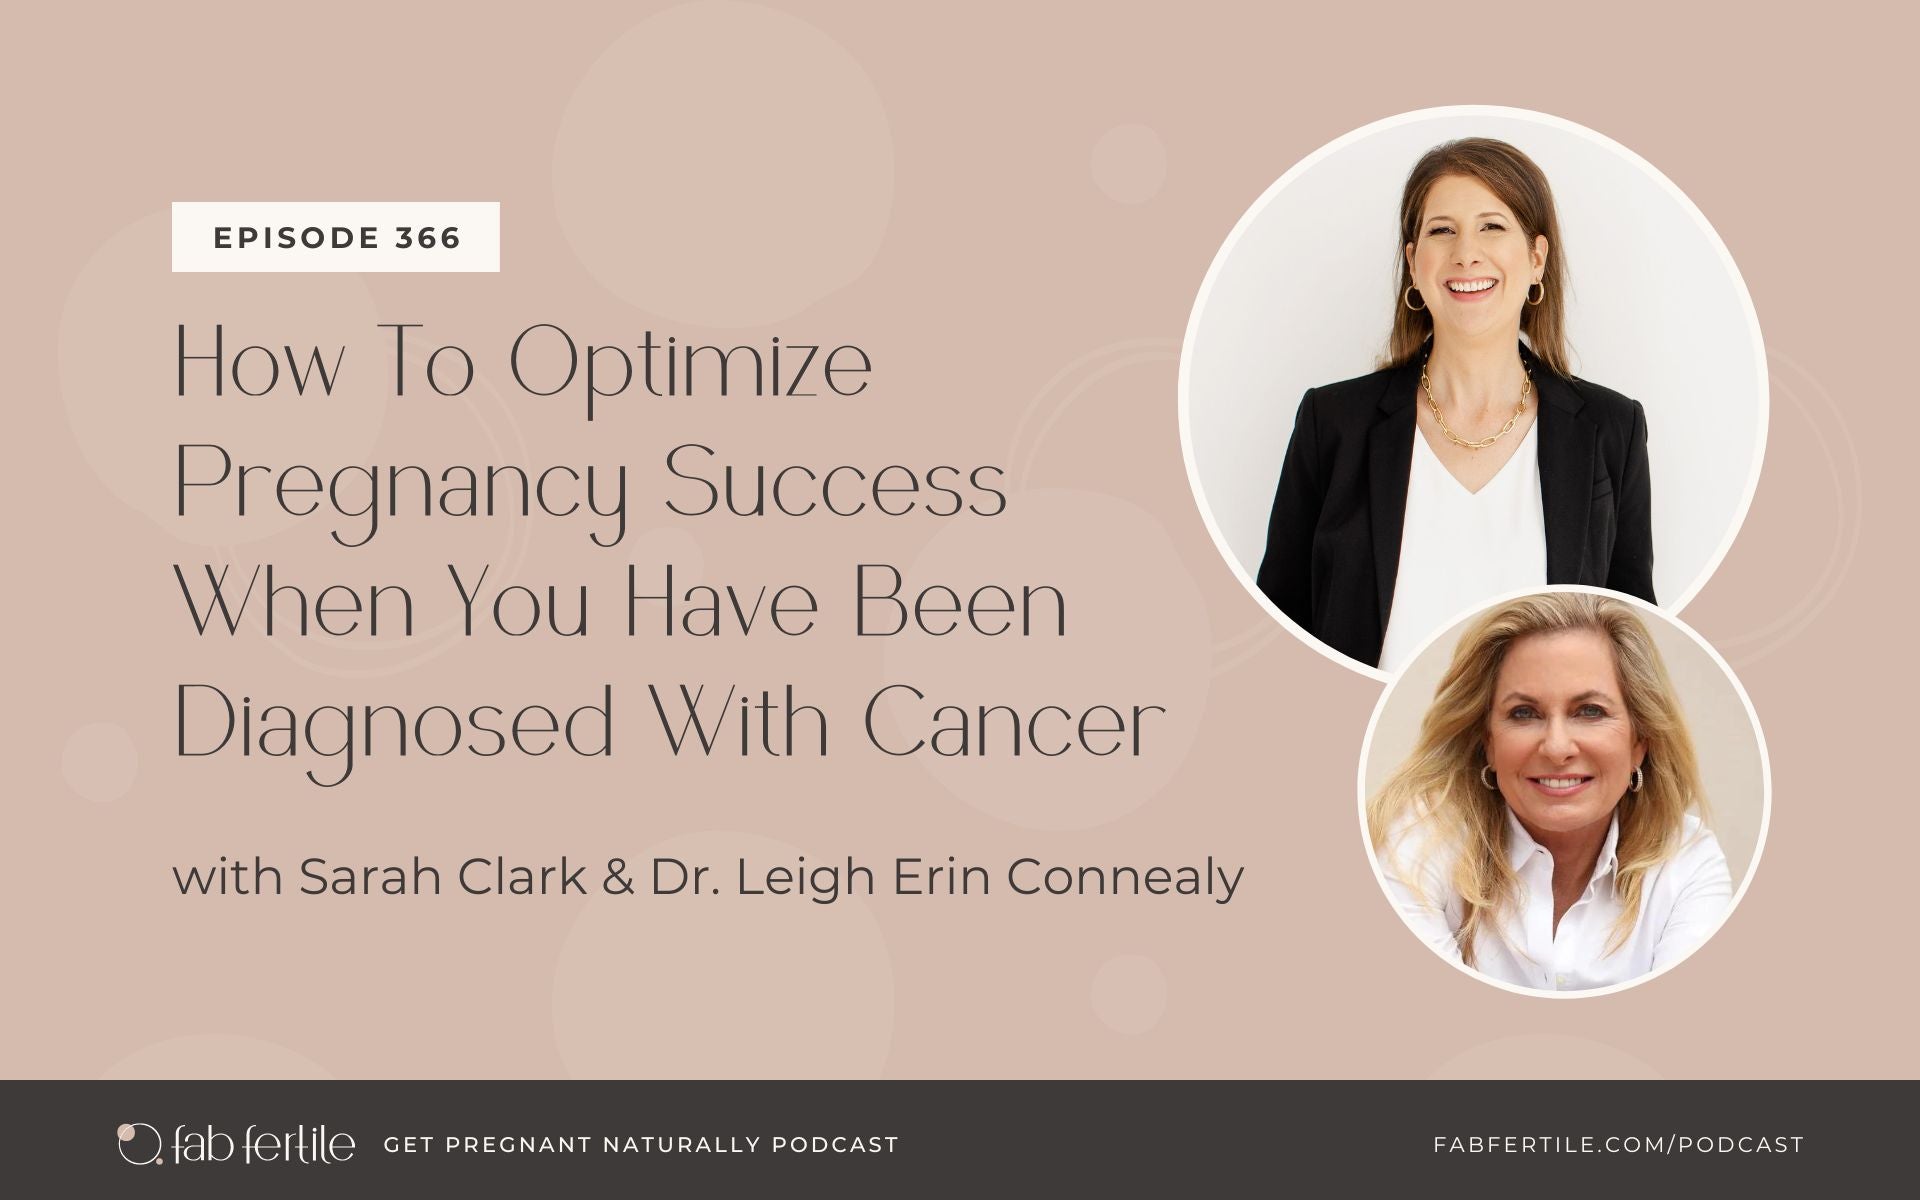 How To Optimize Pregnancy Success When You Have Been Diagnosed With Cancer